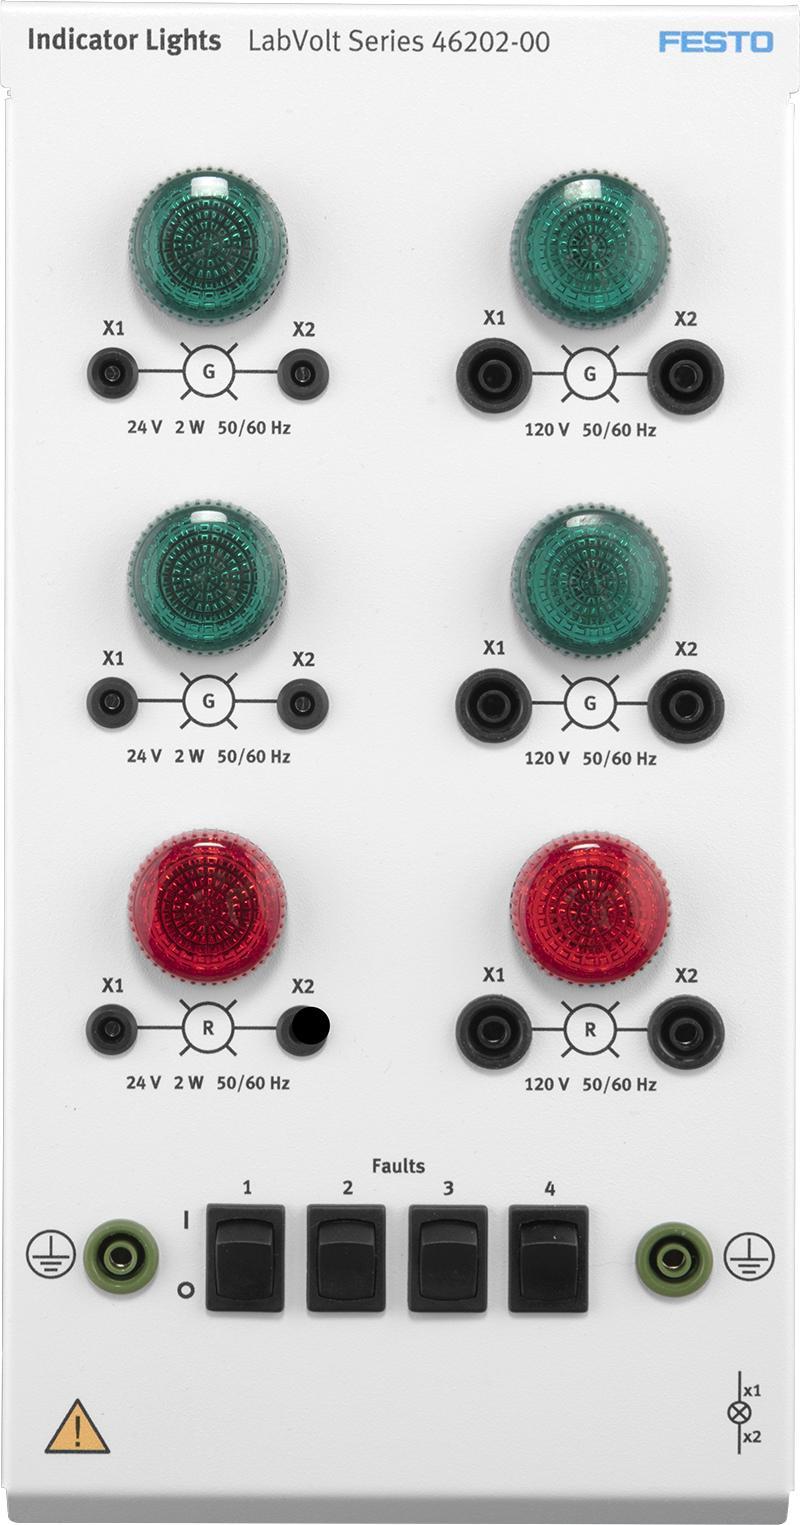 Indicator Lights 46202-00 The Indicator Lights module is fitted with three low-voltage (24 V) green and red incandescent lights and three high-voltage (ac power network voltage) green and red LEDs.